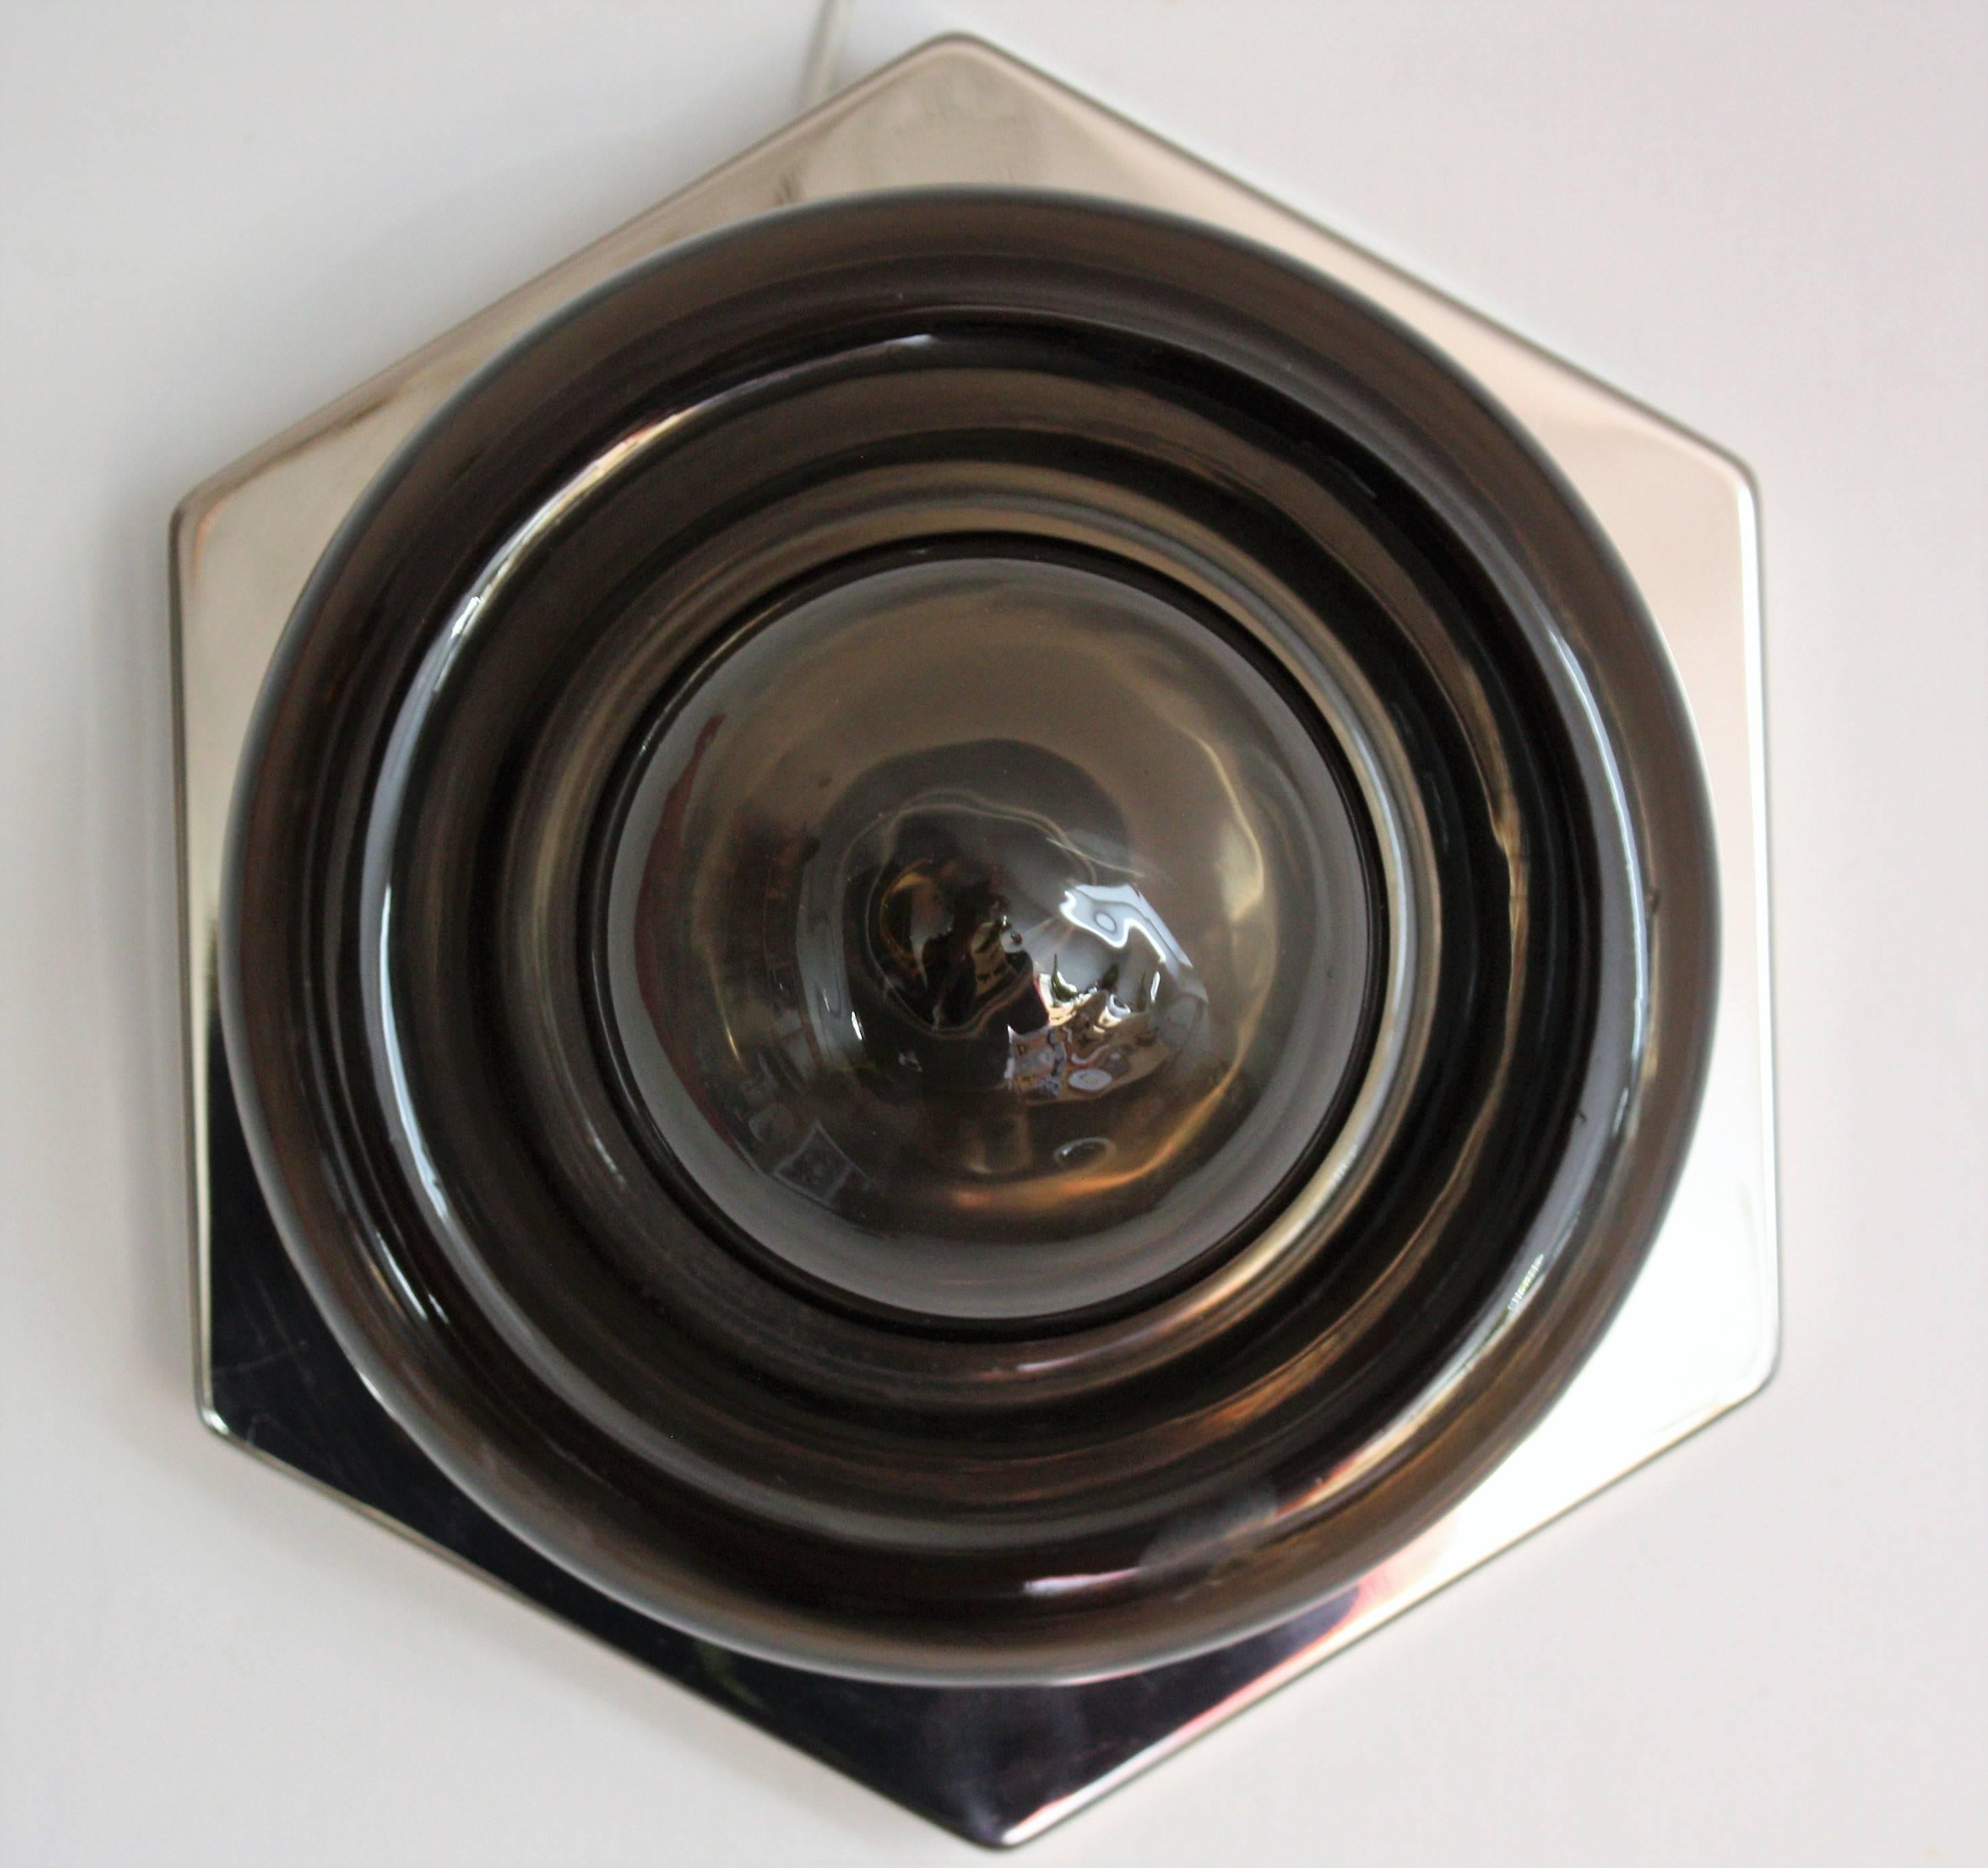 Set of four mid century modern wall lights or flush mount, Germany, 1970s wich are made of glass shade in dark purple color on the nickeled steel frame.
All of four items are in very good vintage condition.
Lamp socket: e 14 ( for standard screw